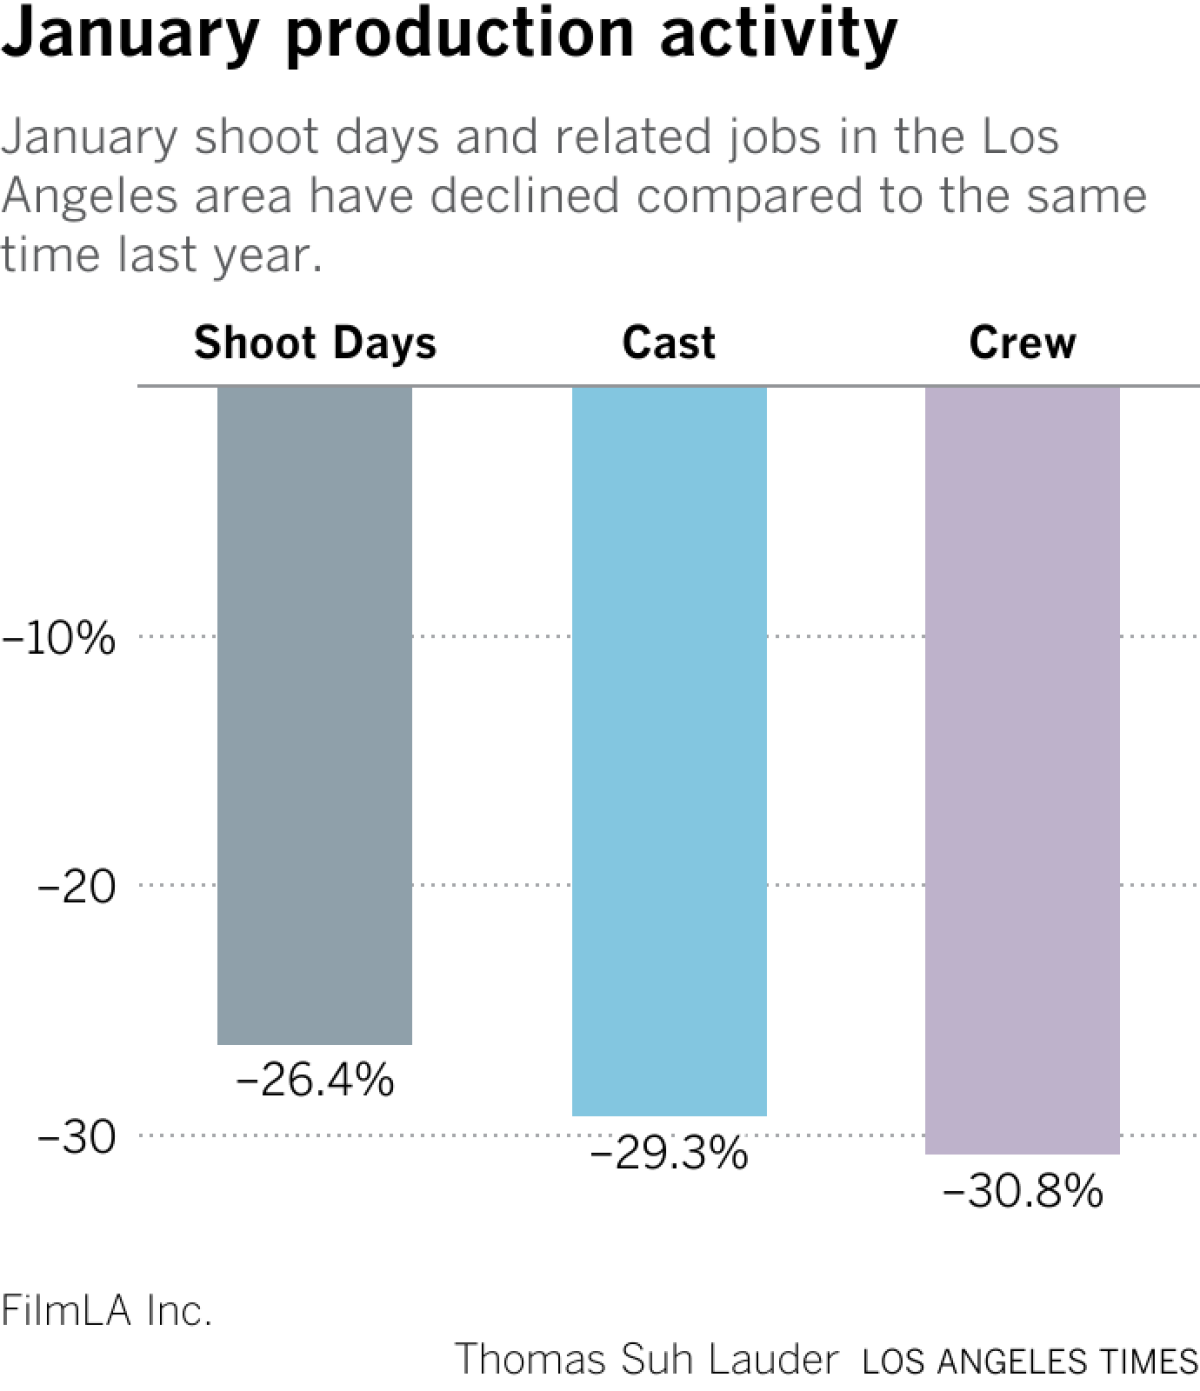 Chart showing January employment and number of shoot days have declined compared to the same time last year.